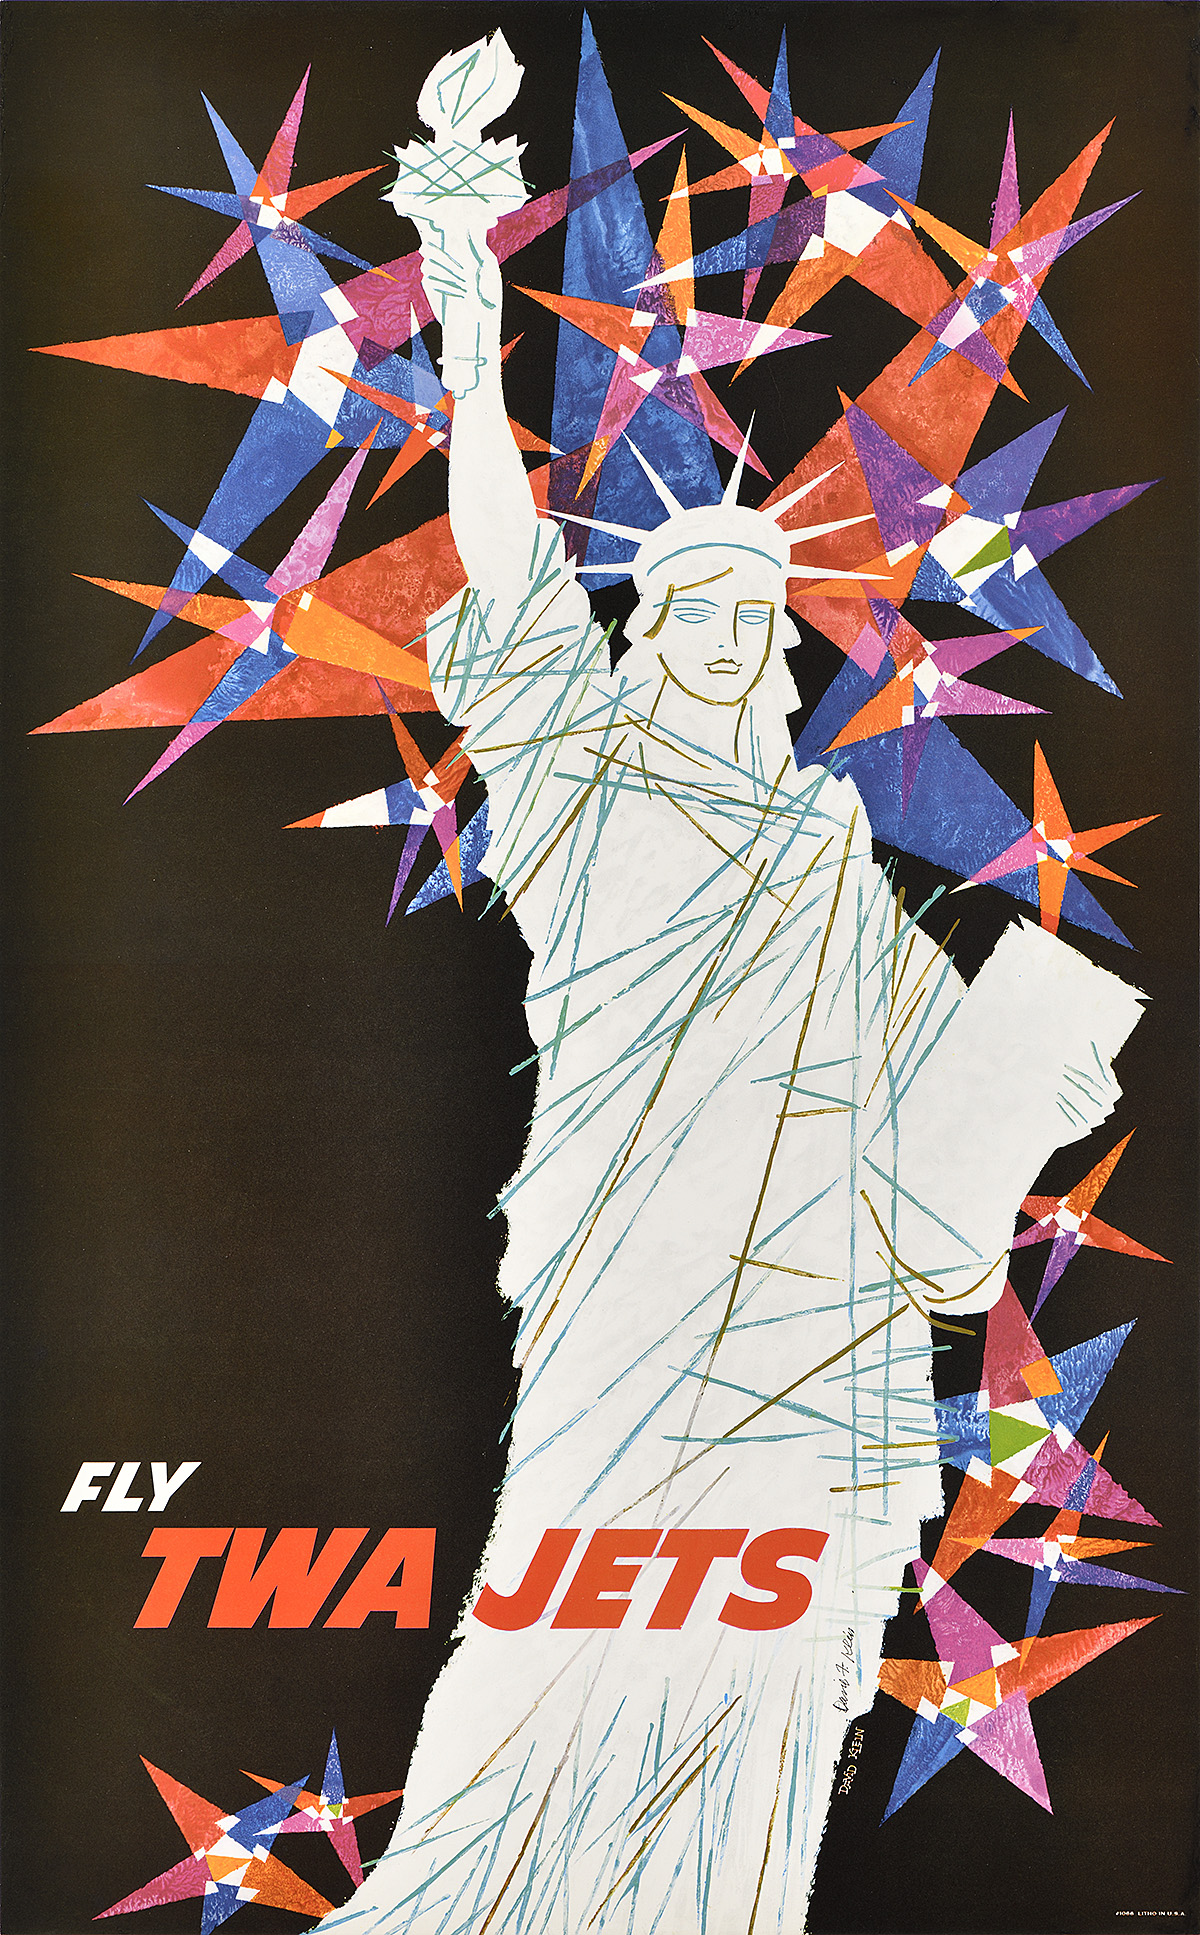 A poster of a drawn Statue of Liberty with lines across her and surrounded by colorful starbursts.